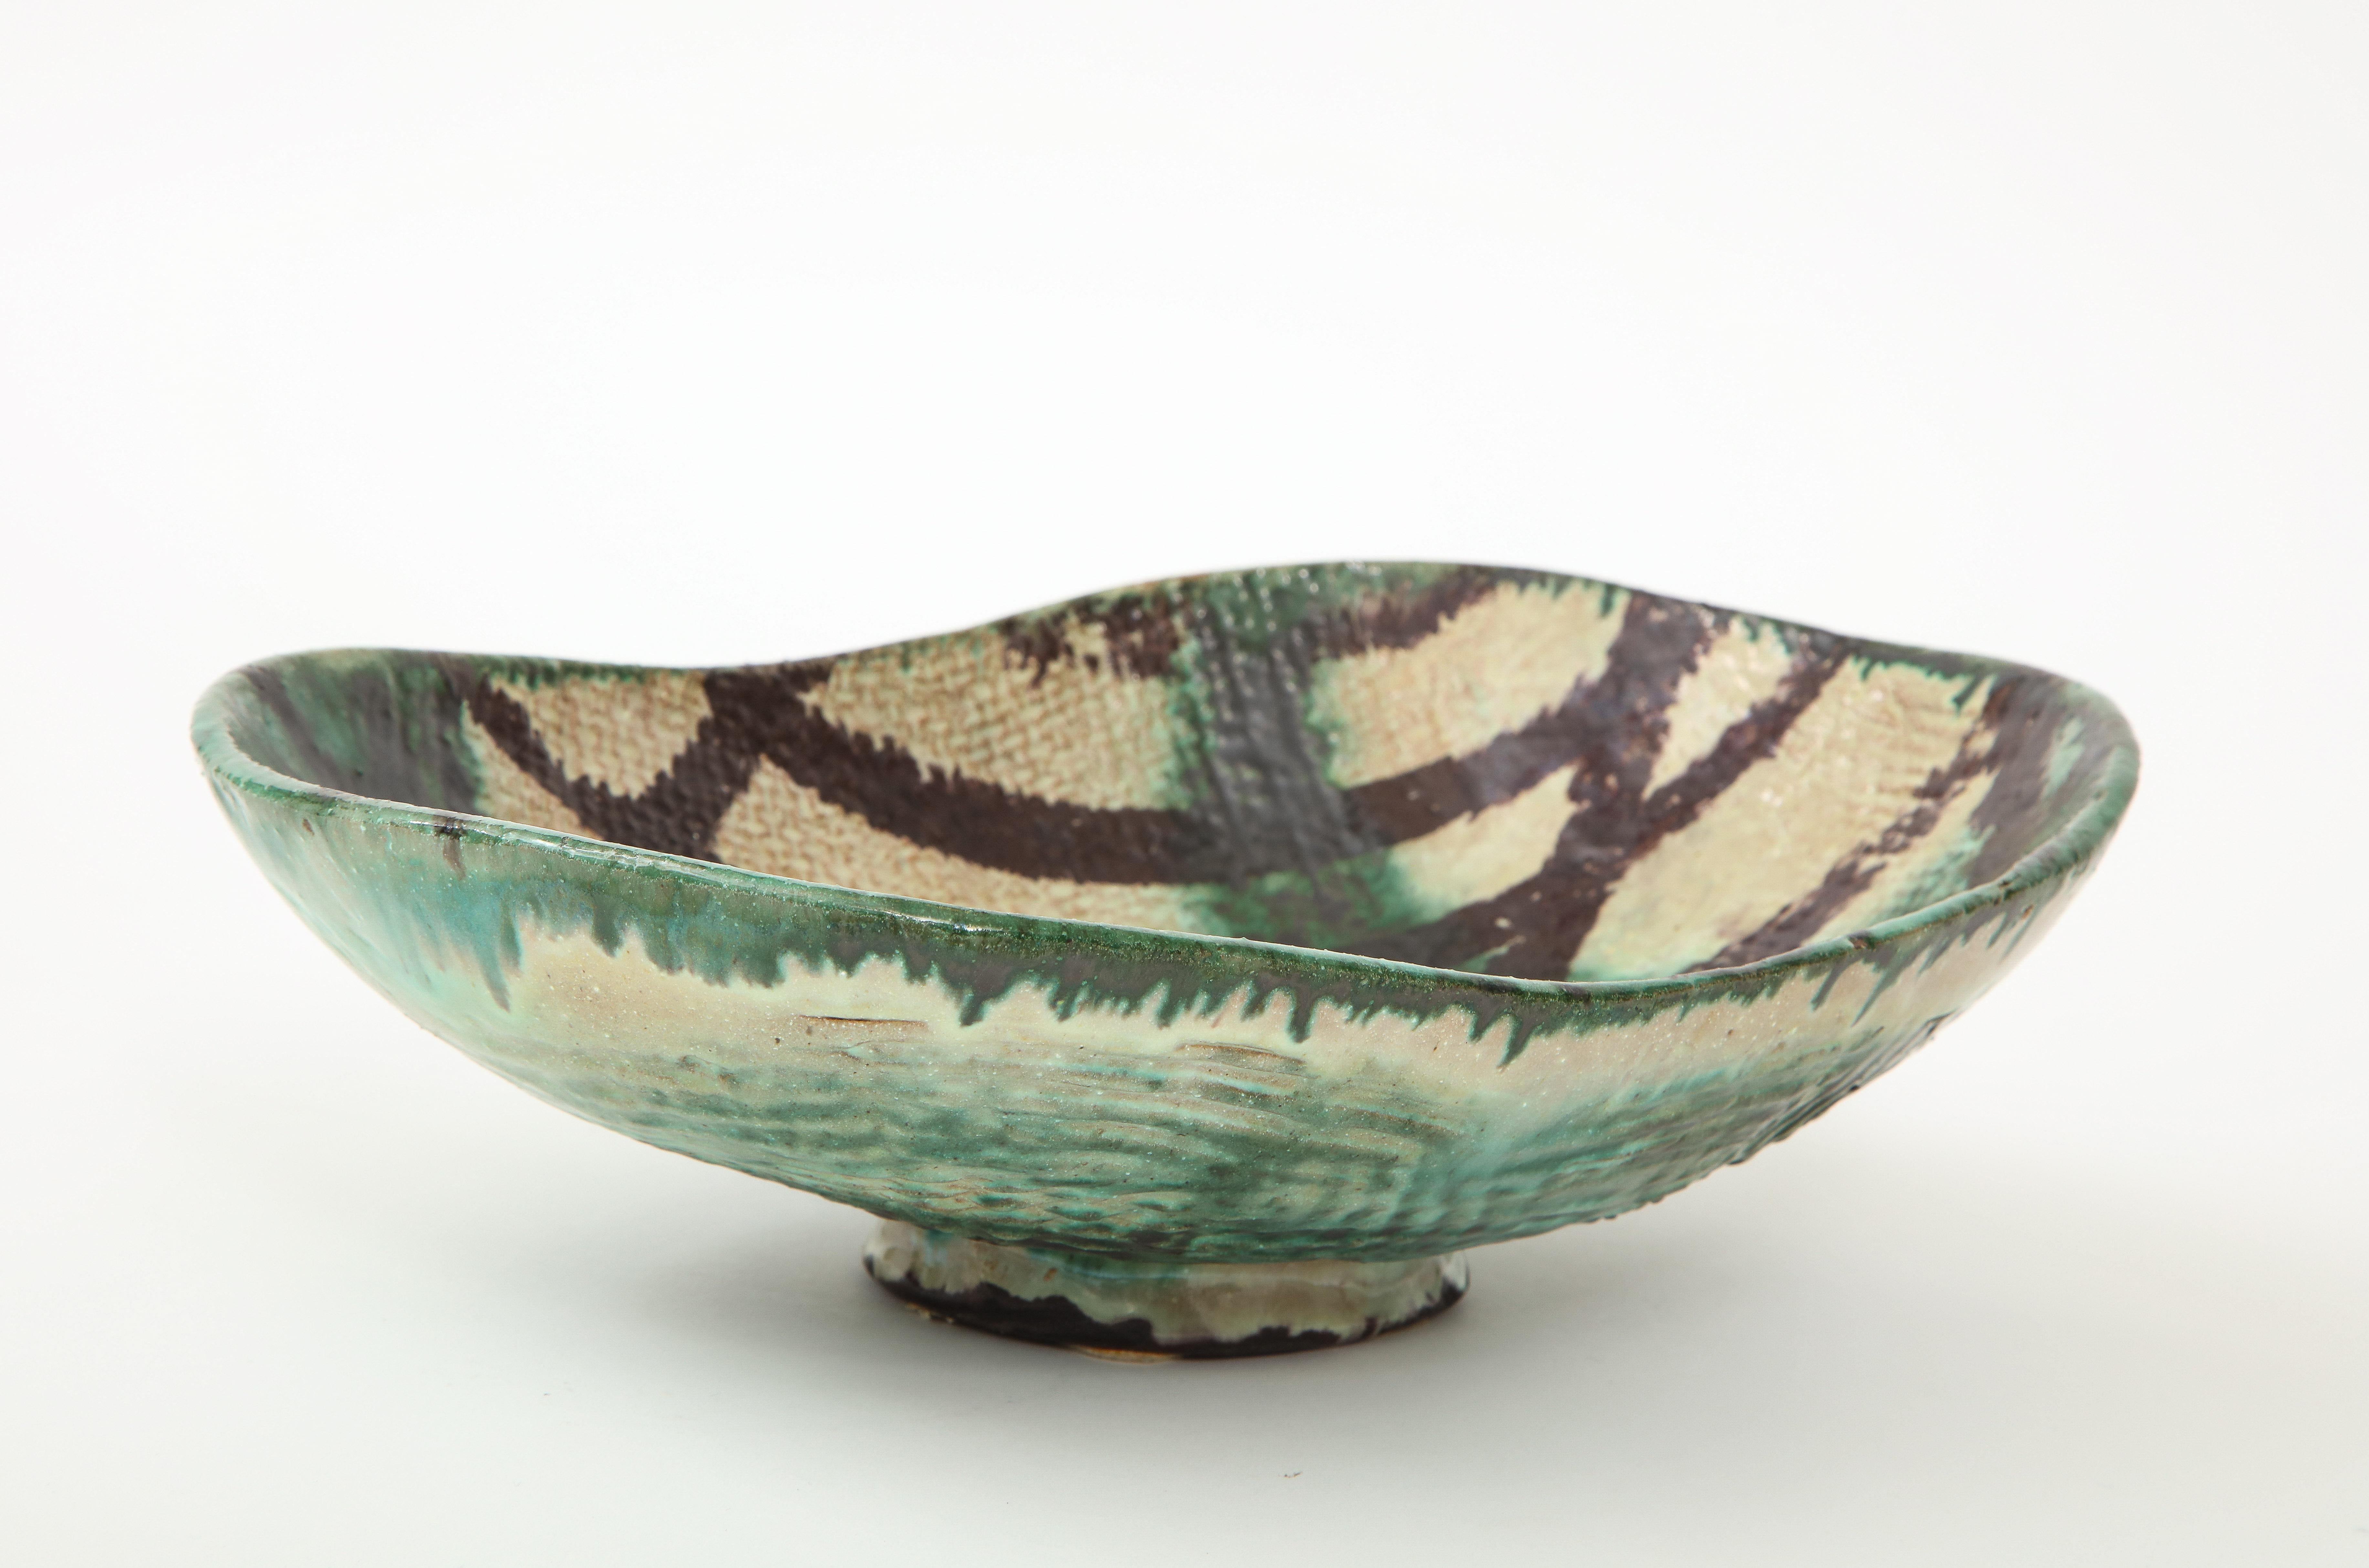 Mid-century ceramic bowl by acclaimed Swedish sculptor Allan Ebeling, 1957 (signed and dated on the underside) 

This stunning oblong footed ceramic consists a dark linear design and painterly green glaze cast against a creamy taupe base. This work